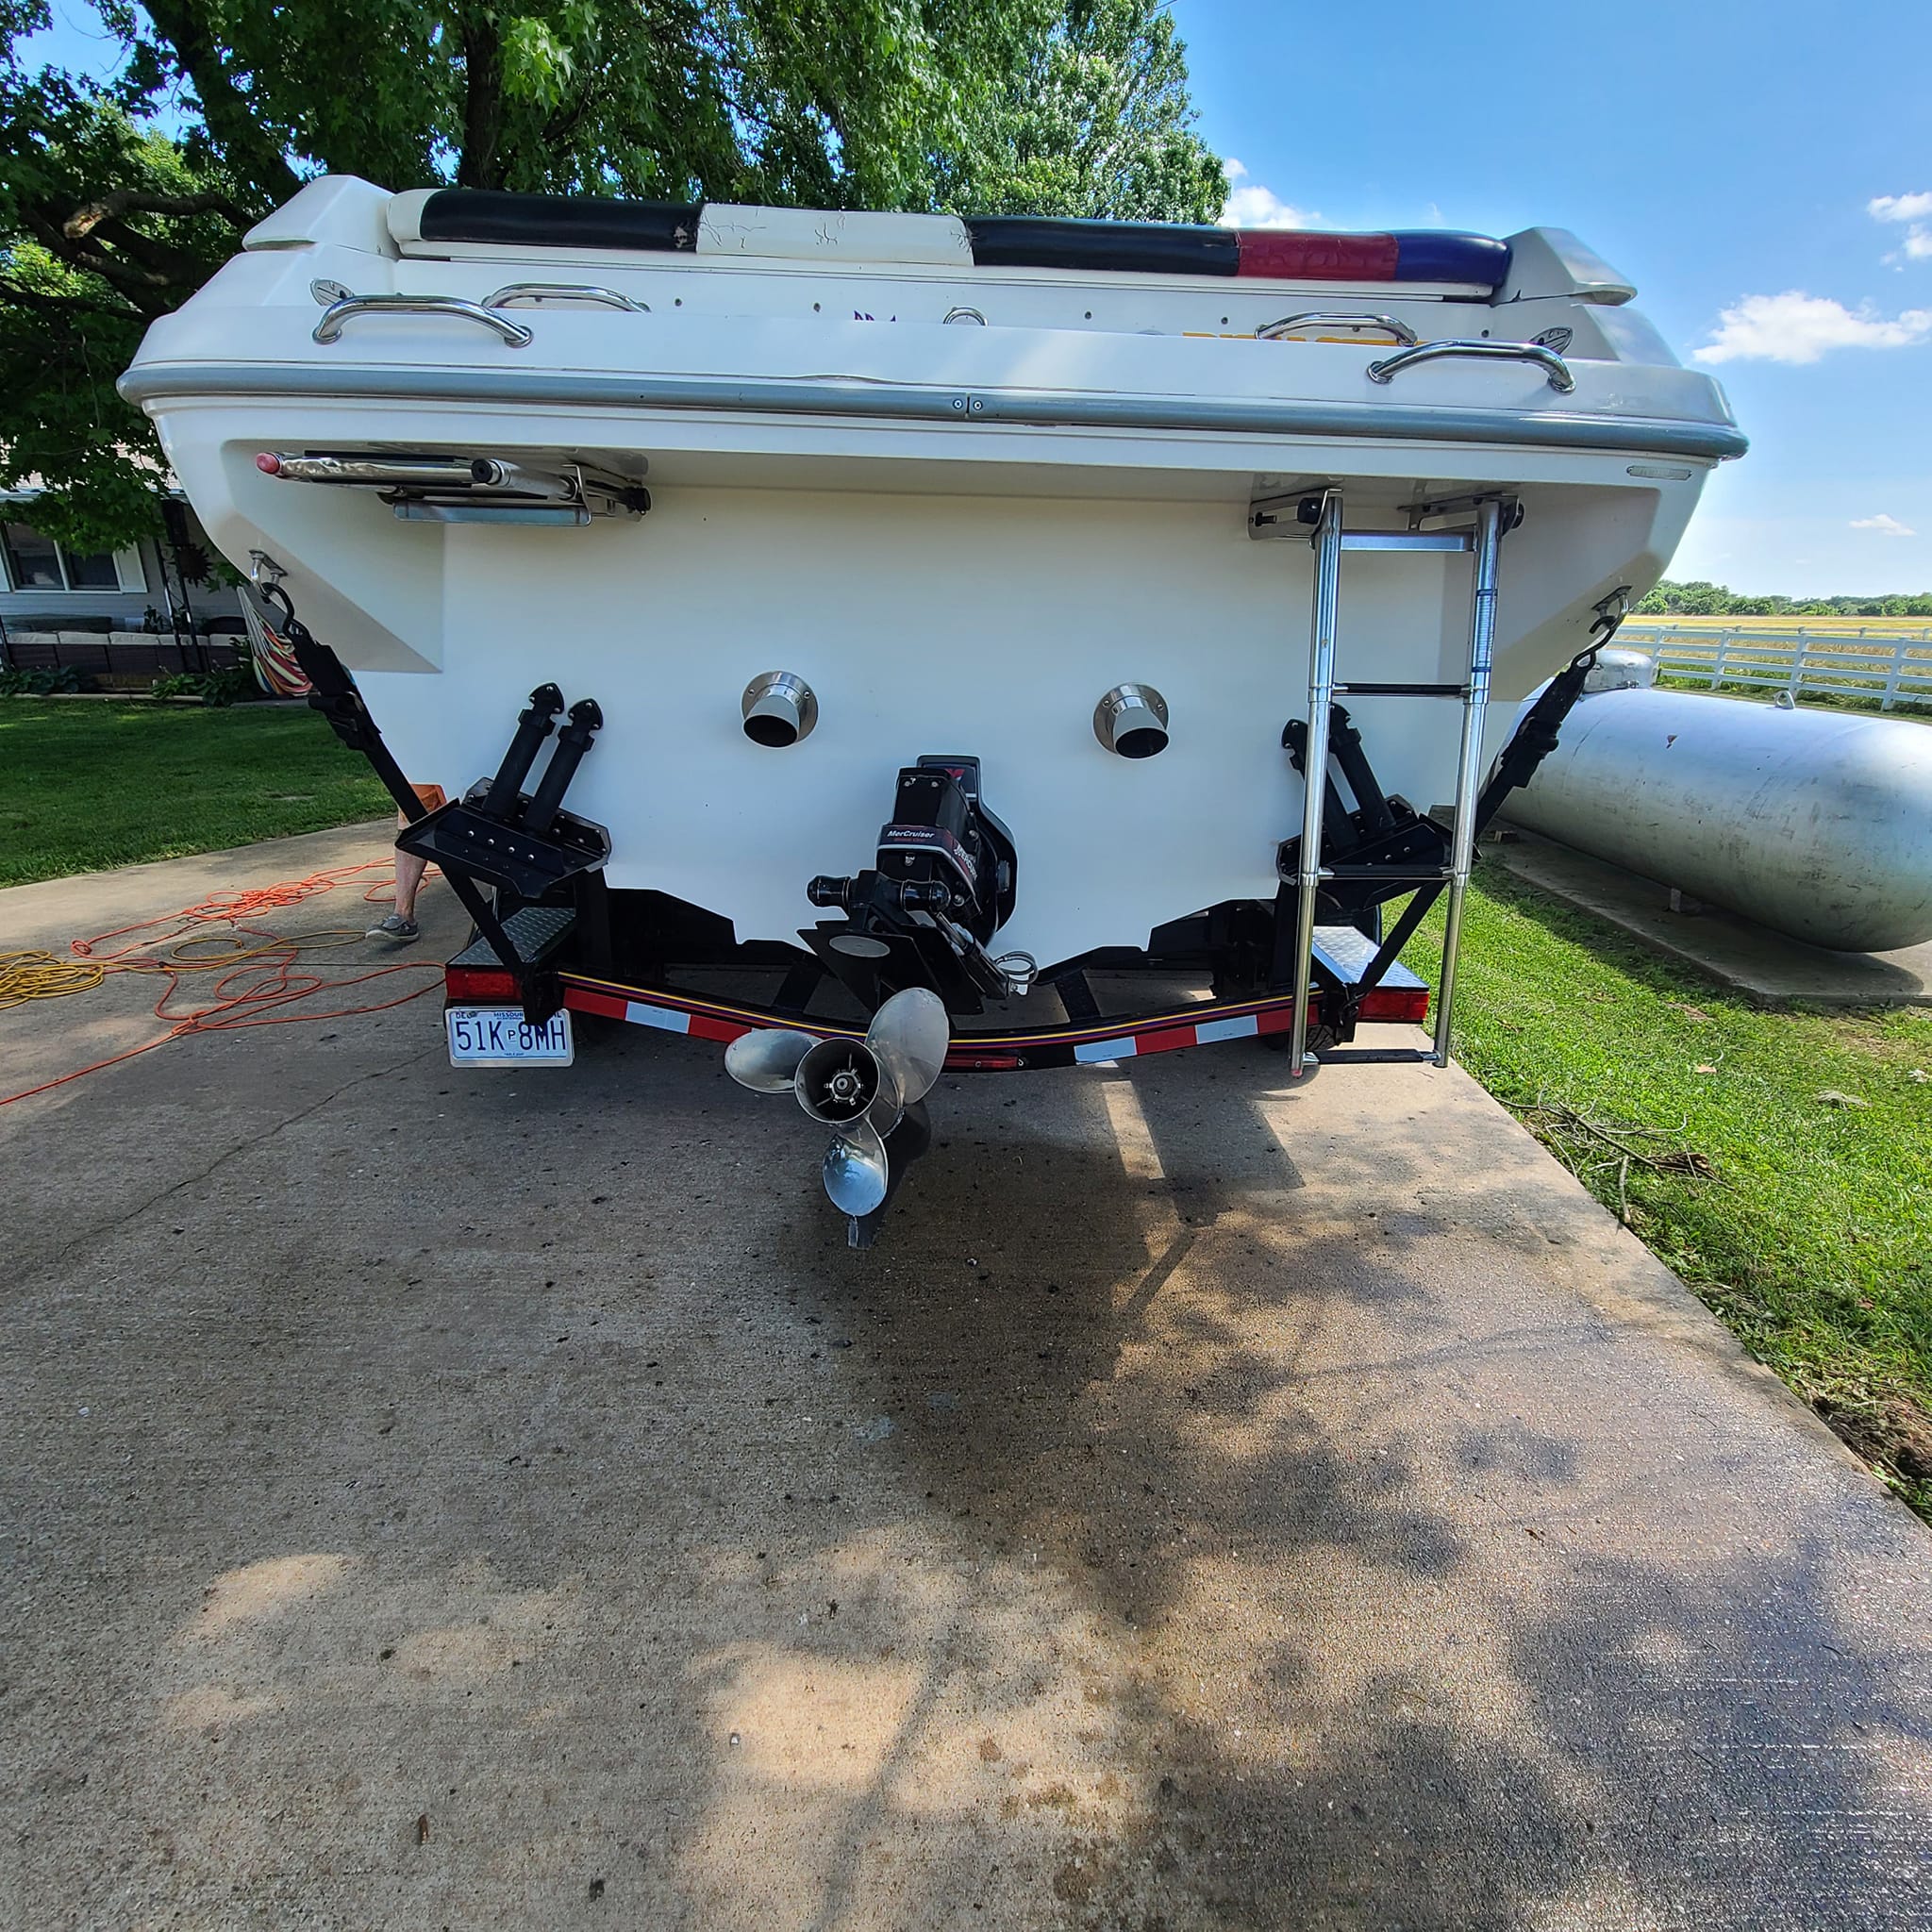 2000 Baja Mach 1 Power boat for sale in Purdy, MO - image 6 